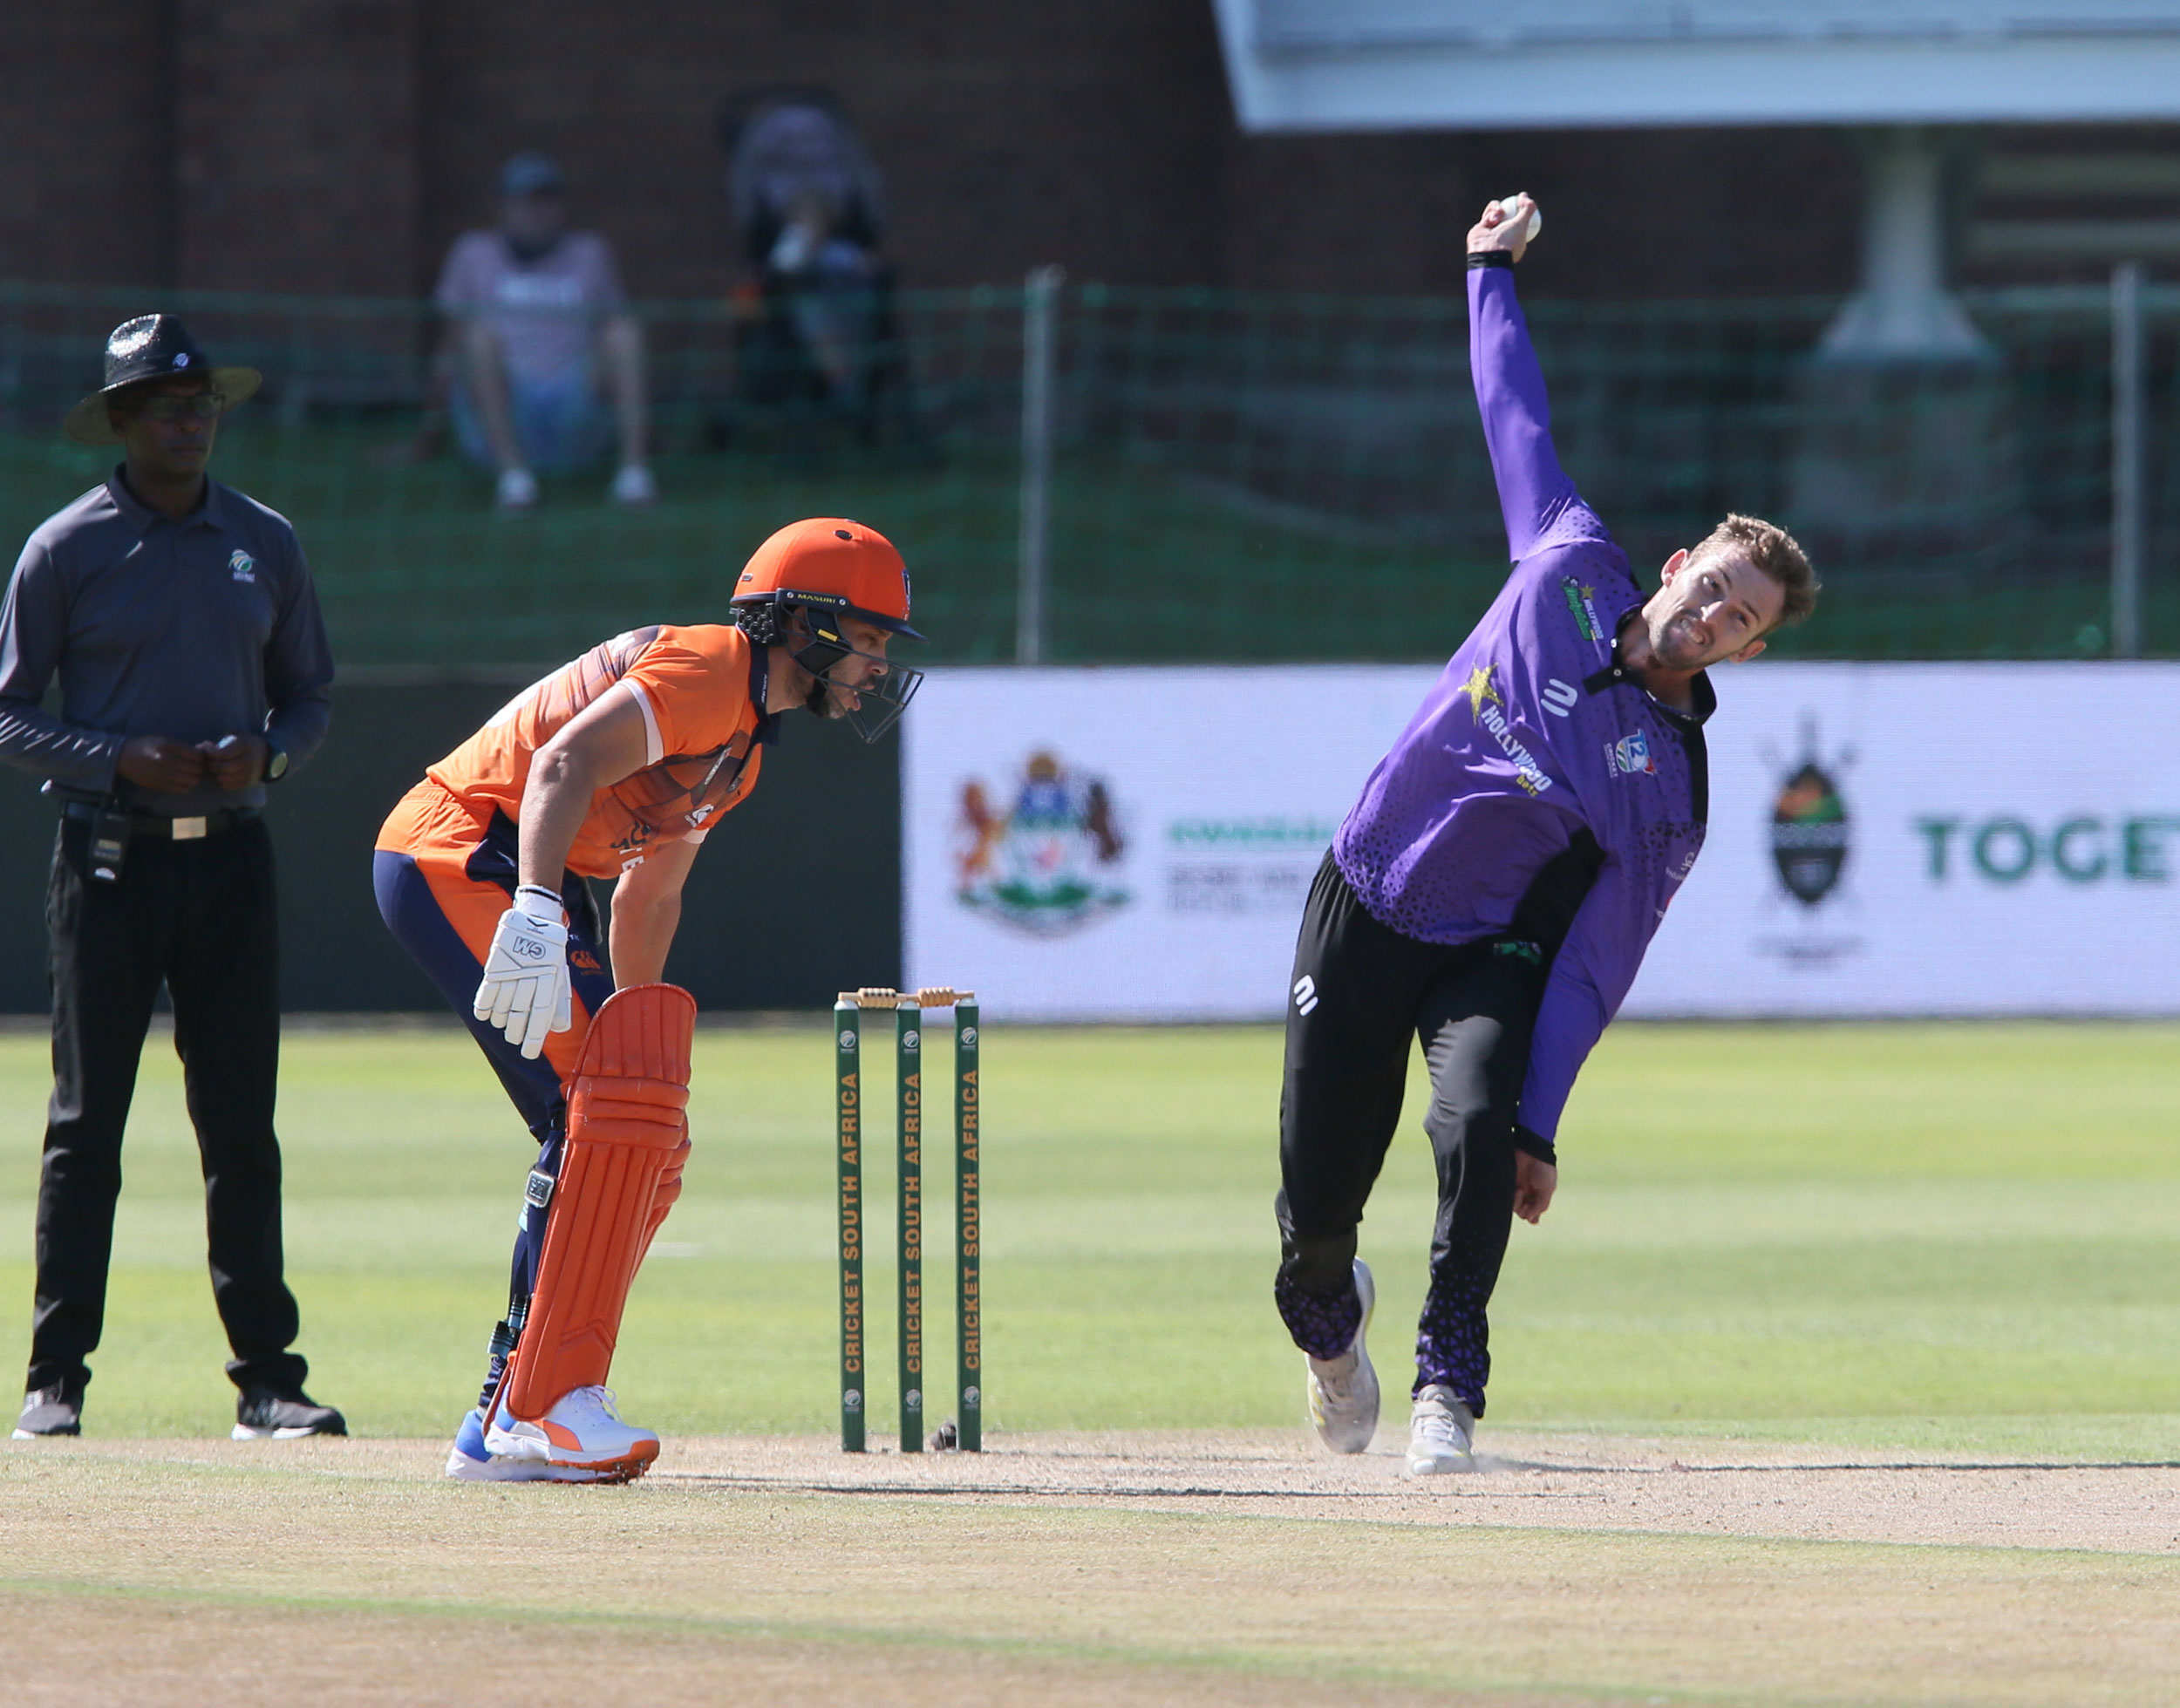 Dolphins Cricket: De Swardt ruled out of T20 due to injury